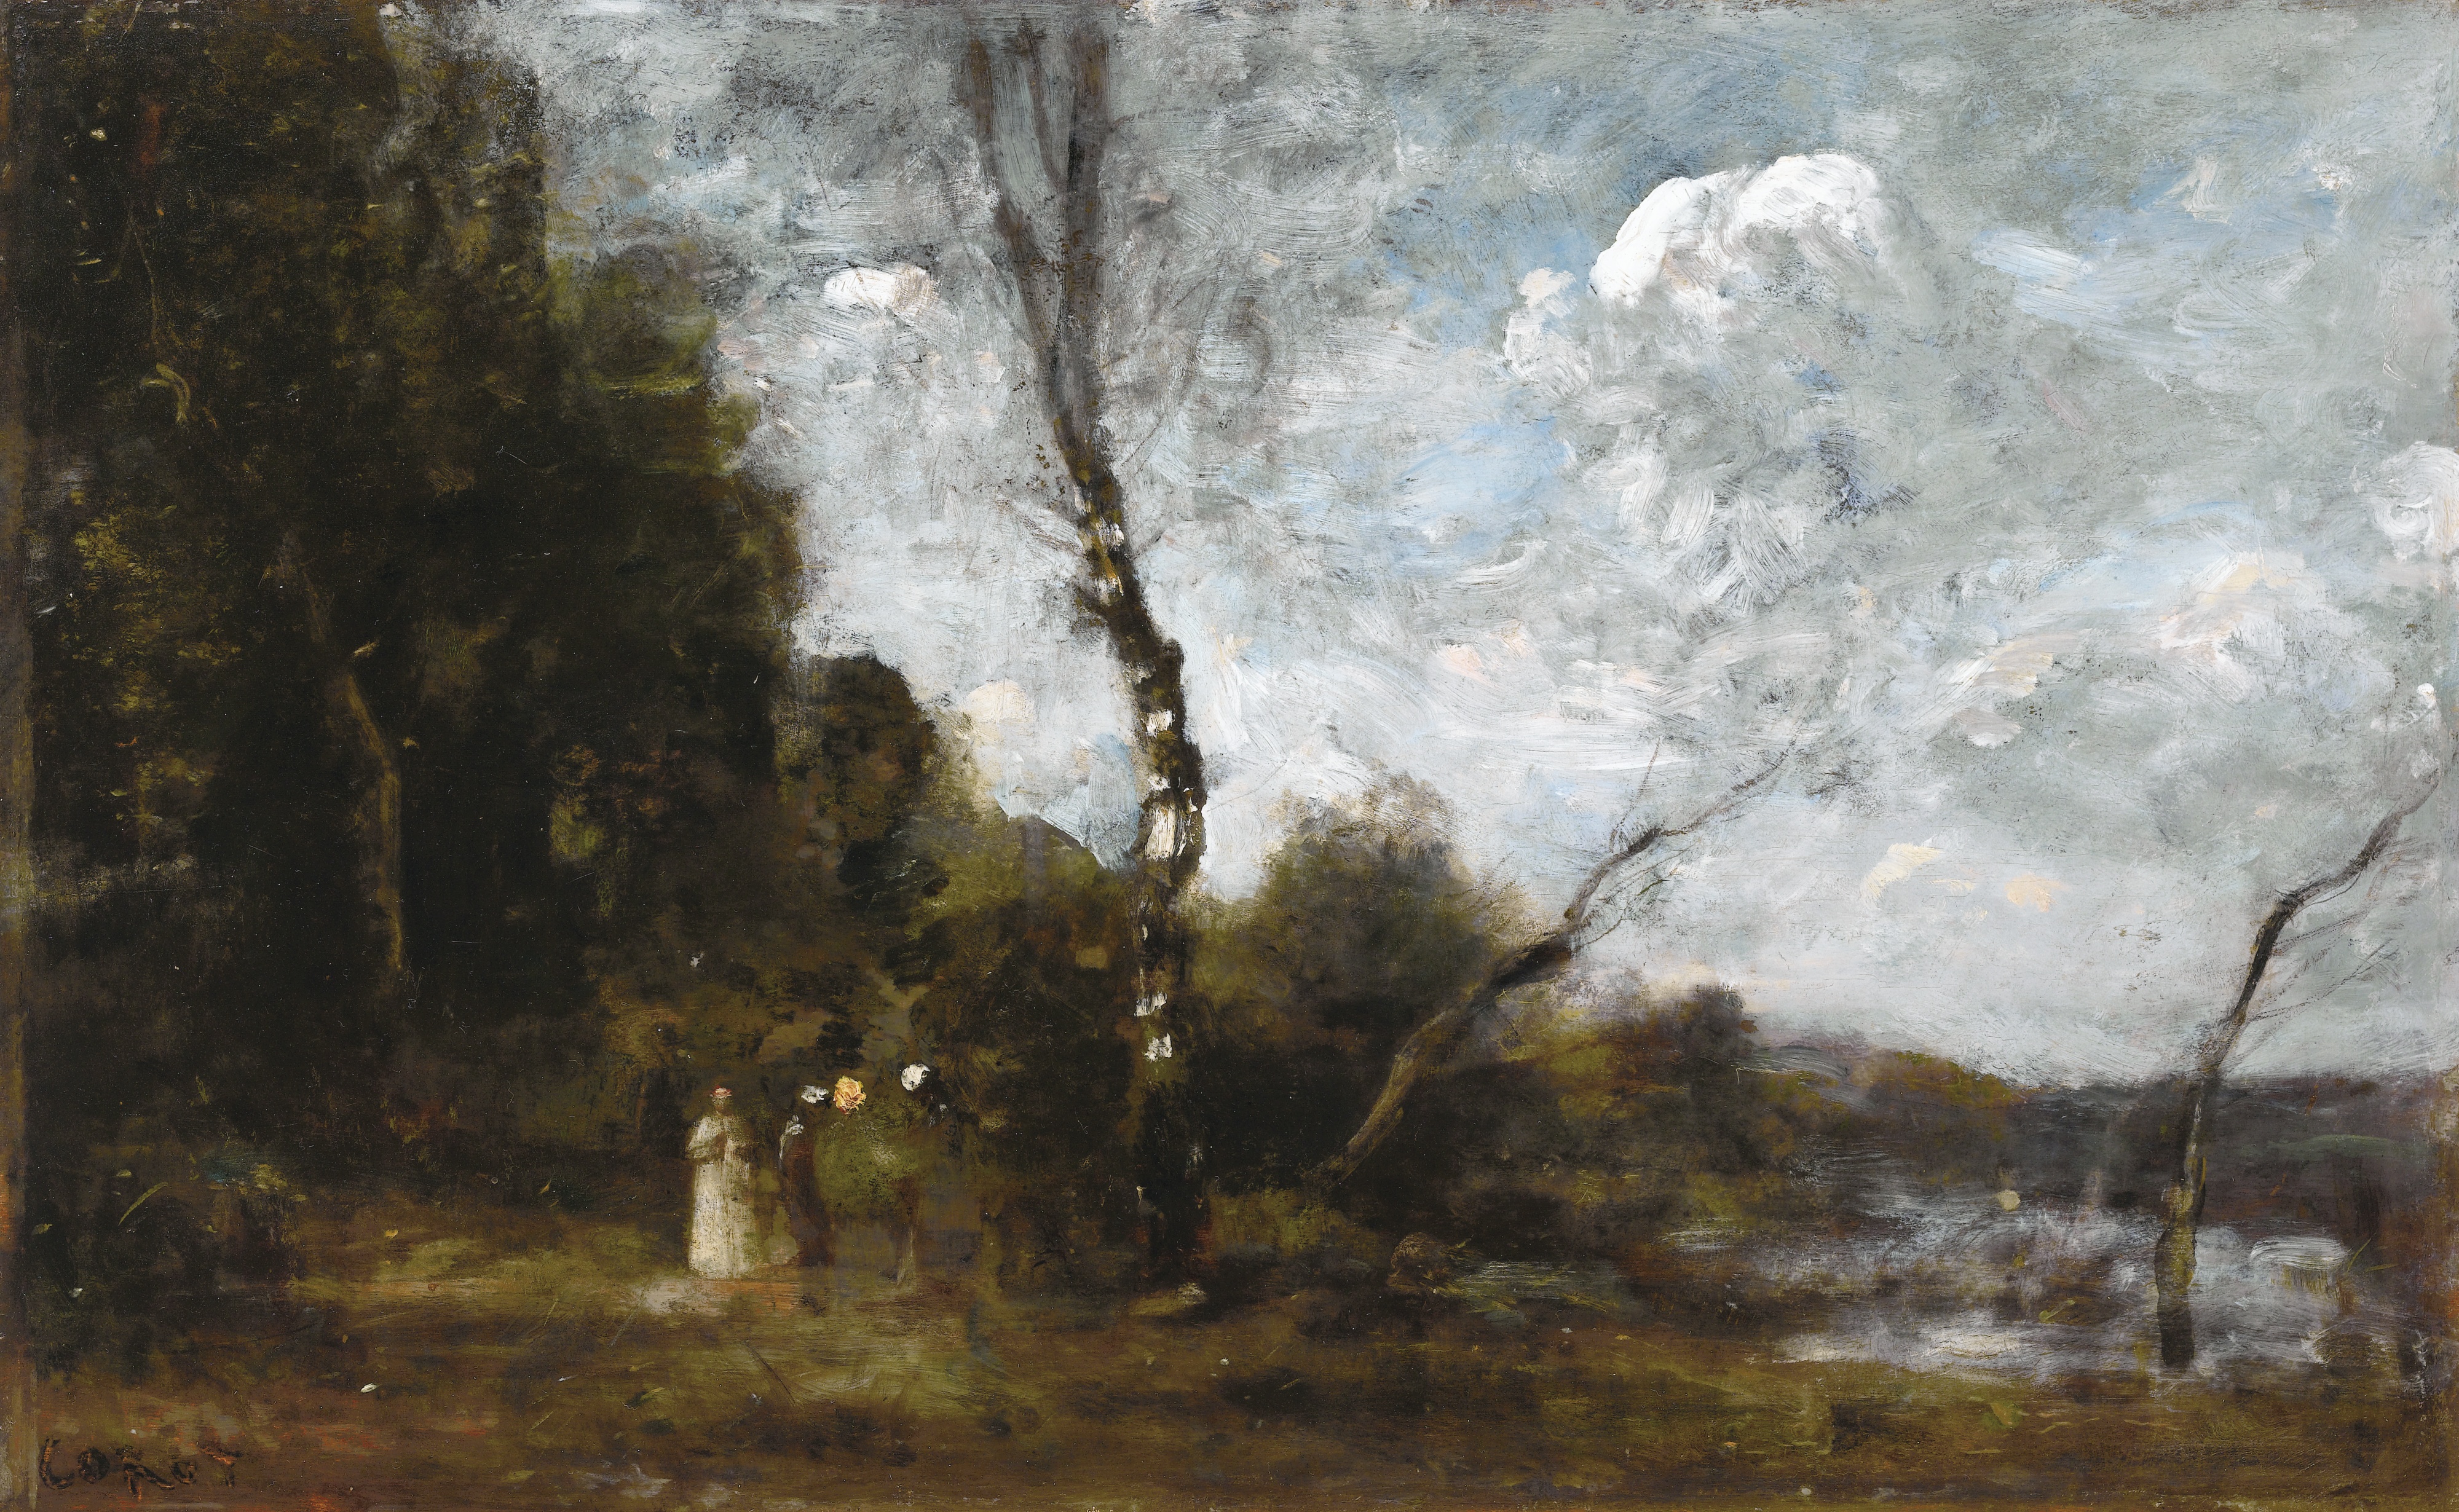 0314_Jean-Baptiste-Camille Corot_Three peasant women by a wood 썸네일